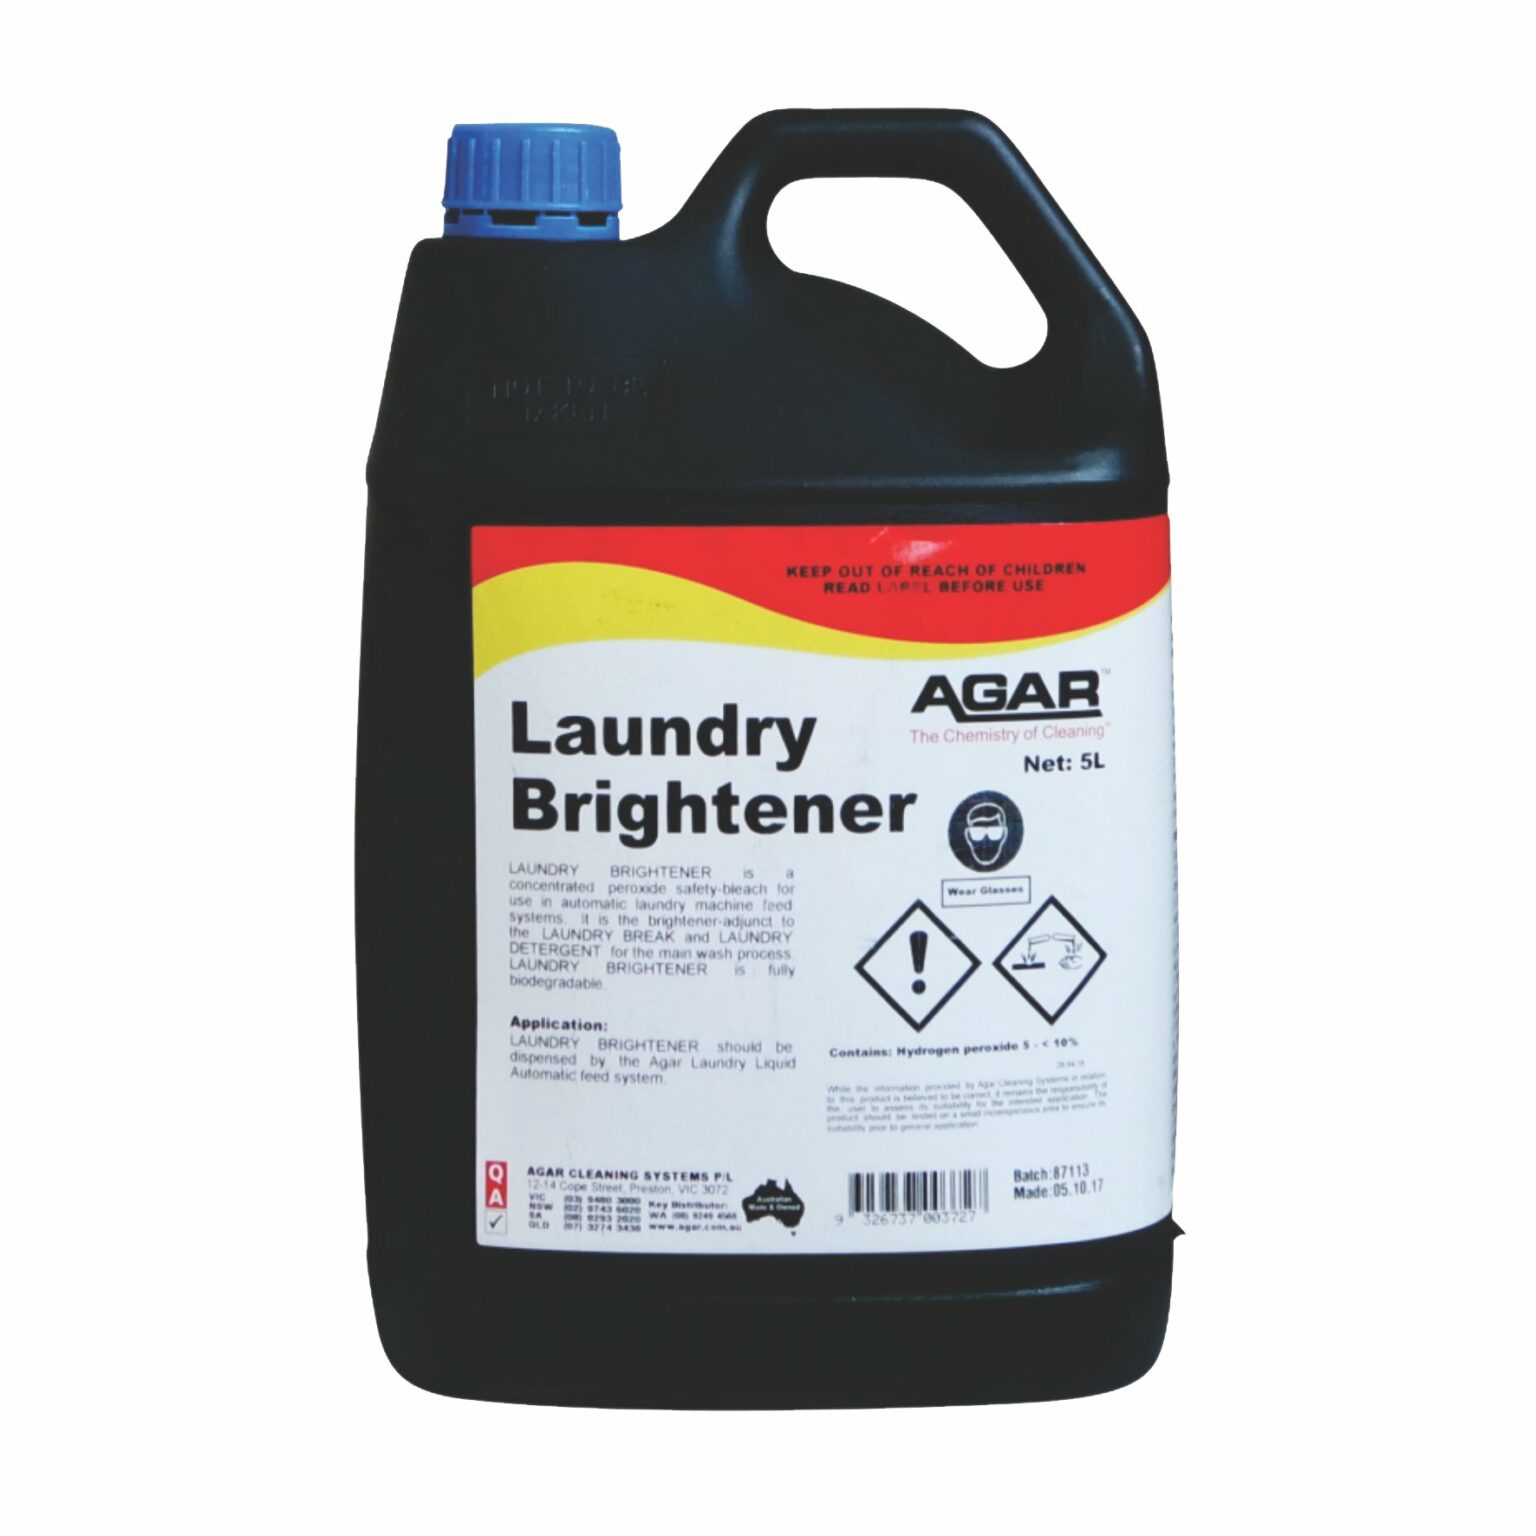 Agar Laundry Brightener Concentrated Peroxide, 5L